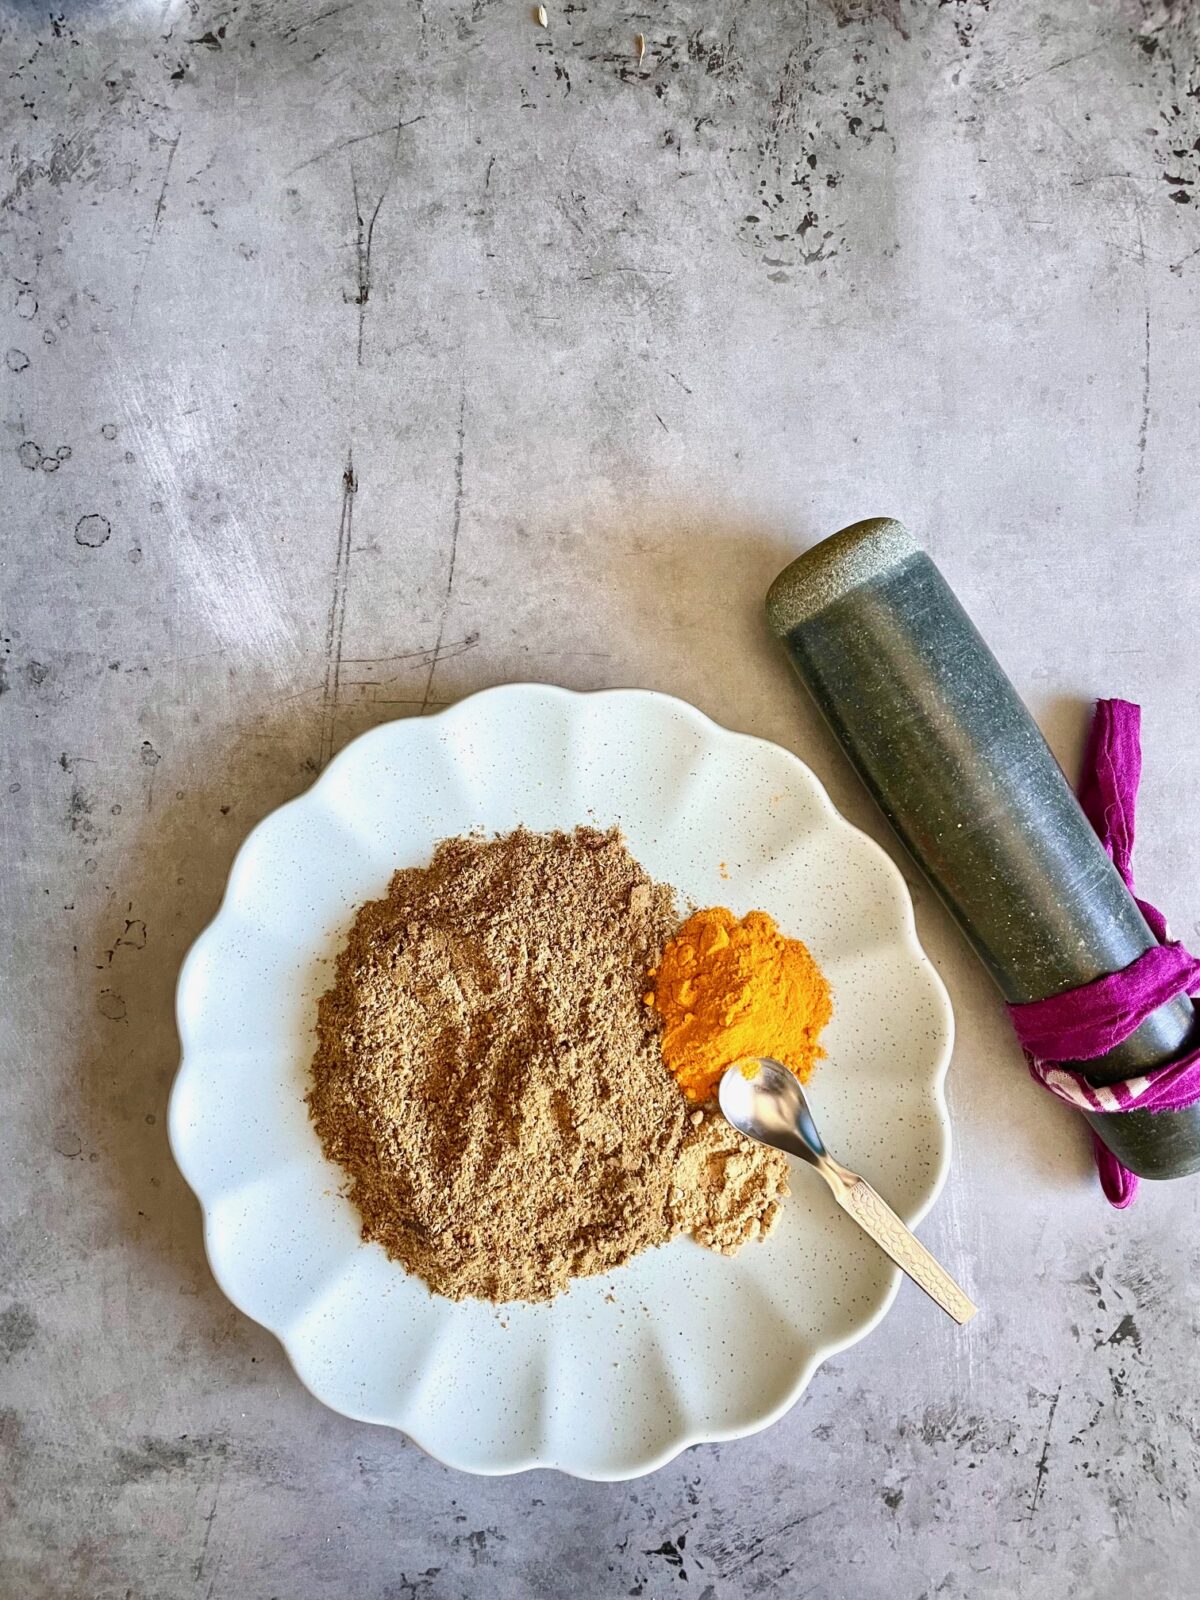 Curry powder, turmeric powder and ginger powder in plate with spoon.